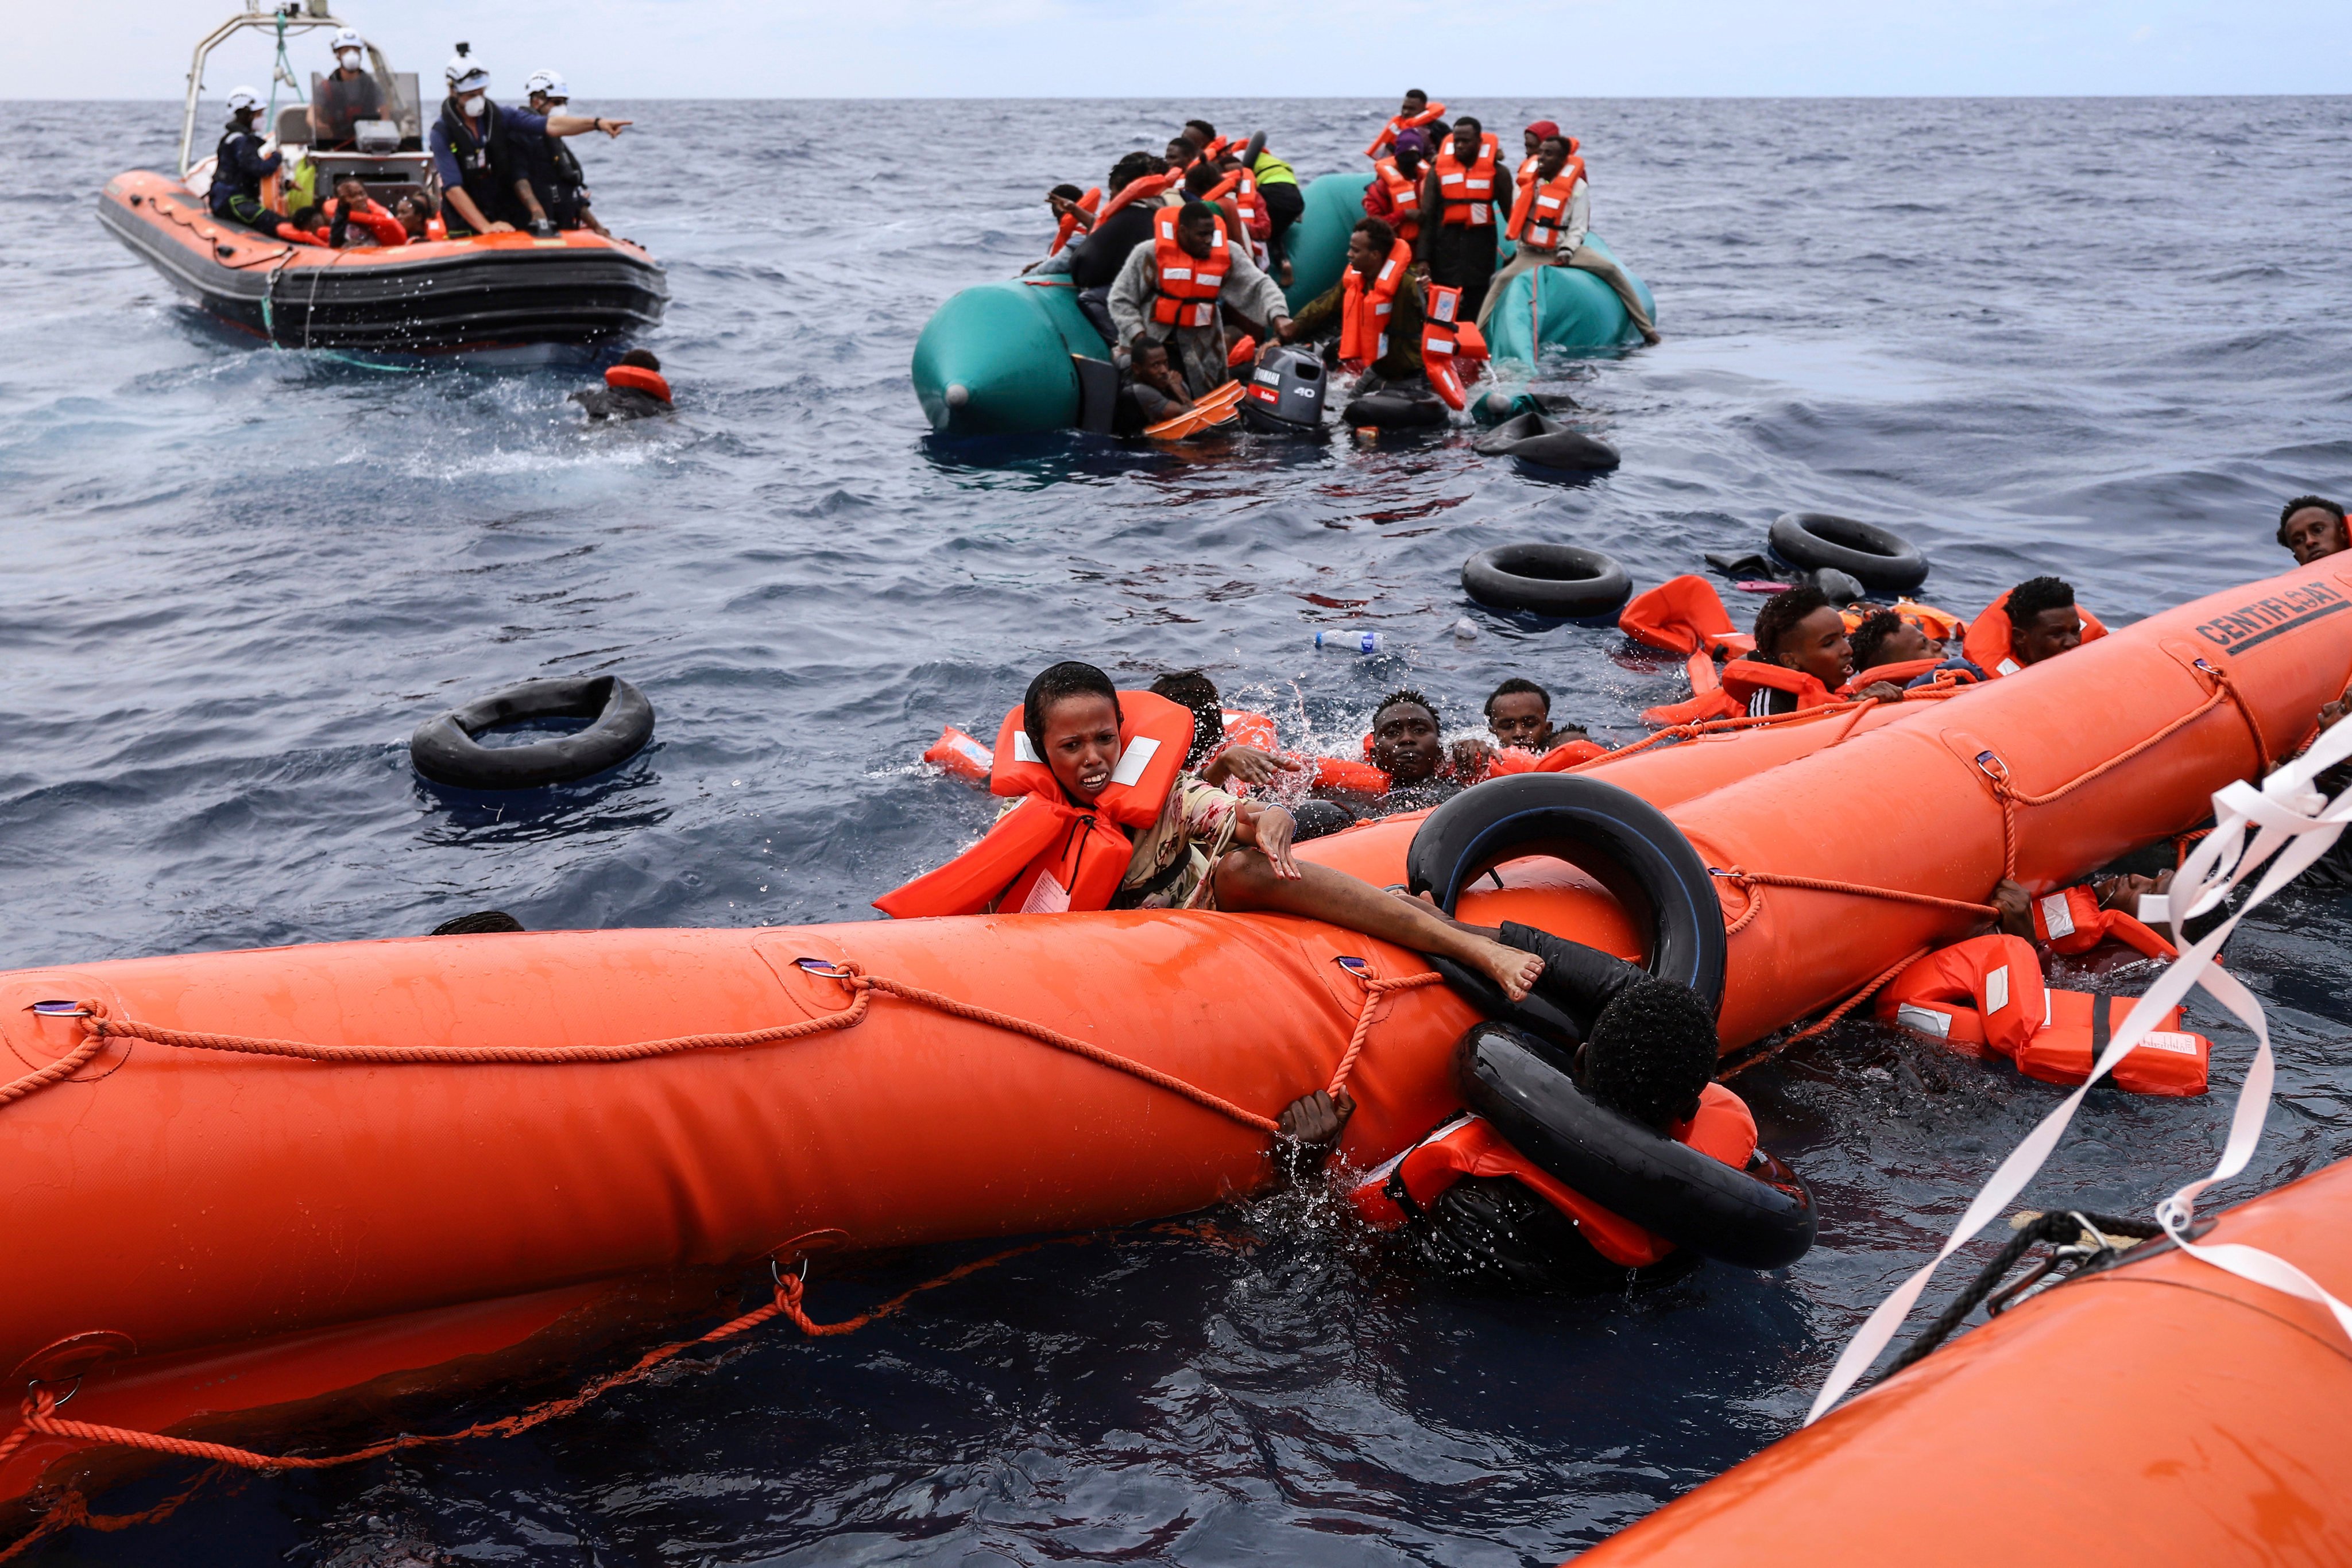 Migrants aboard a rubber boat end up in the water, while others cling on to a centifloat before being rescued near Libya. EU nations passed sweeping new reforms to the bloc’s failed asylum system. Photo: AP/File